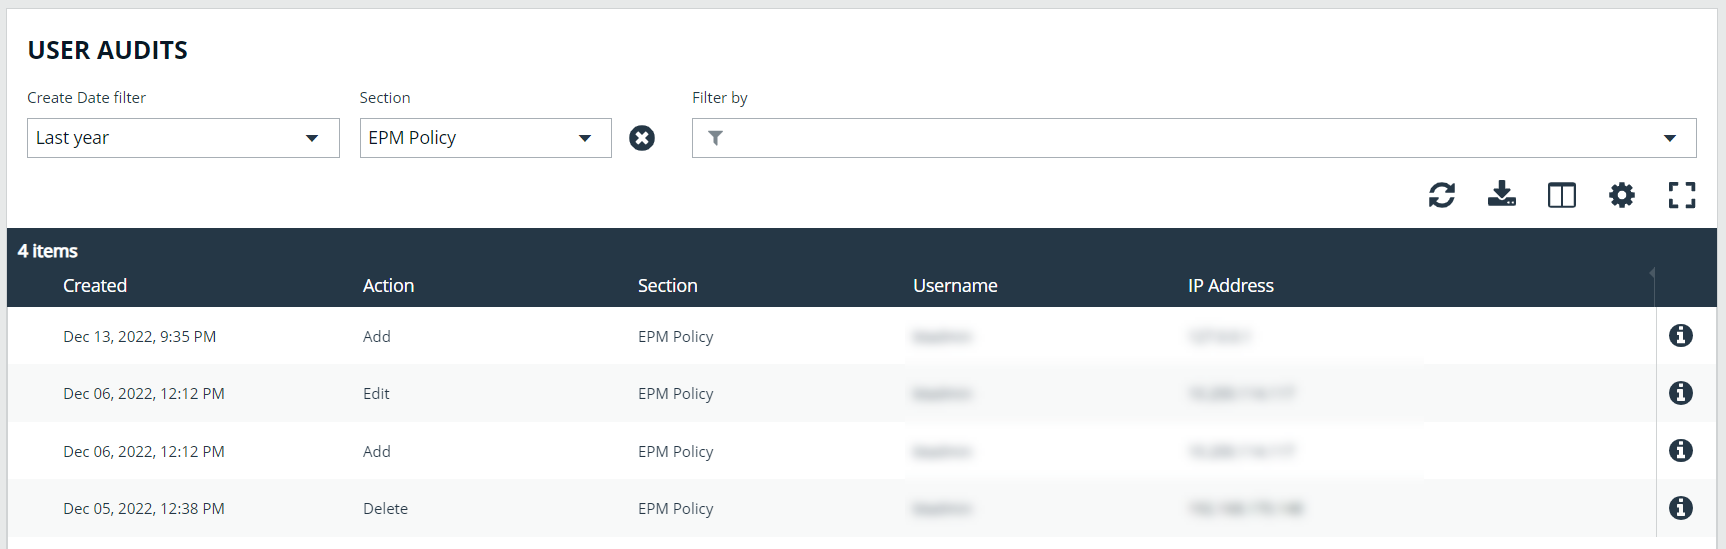 EPM Policy Items on User Audits Page in BeyondInsight